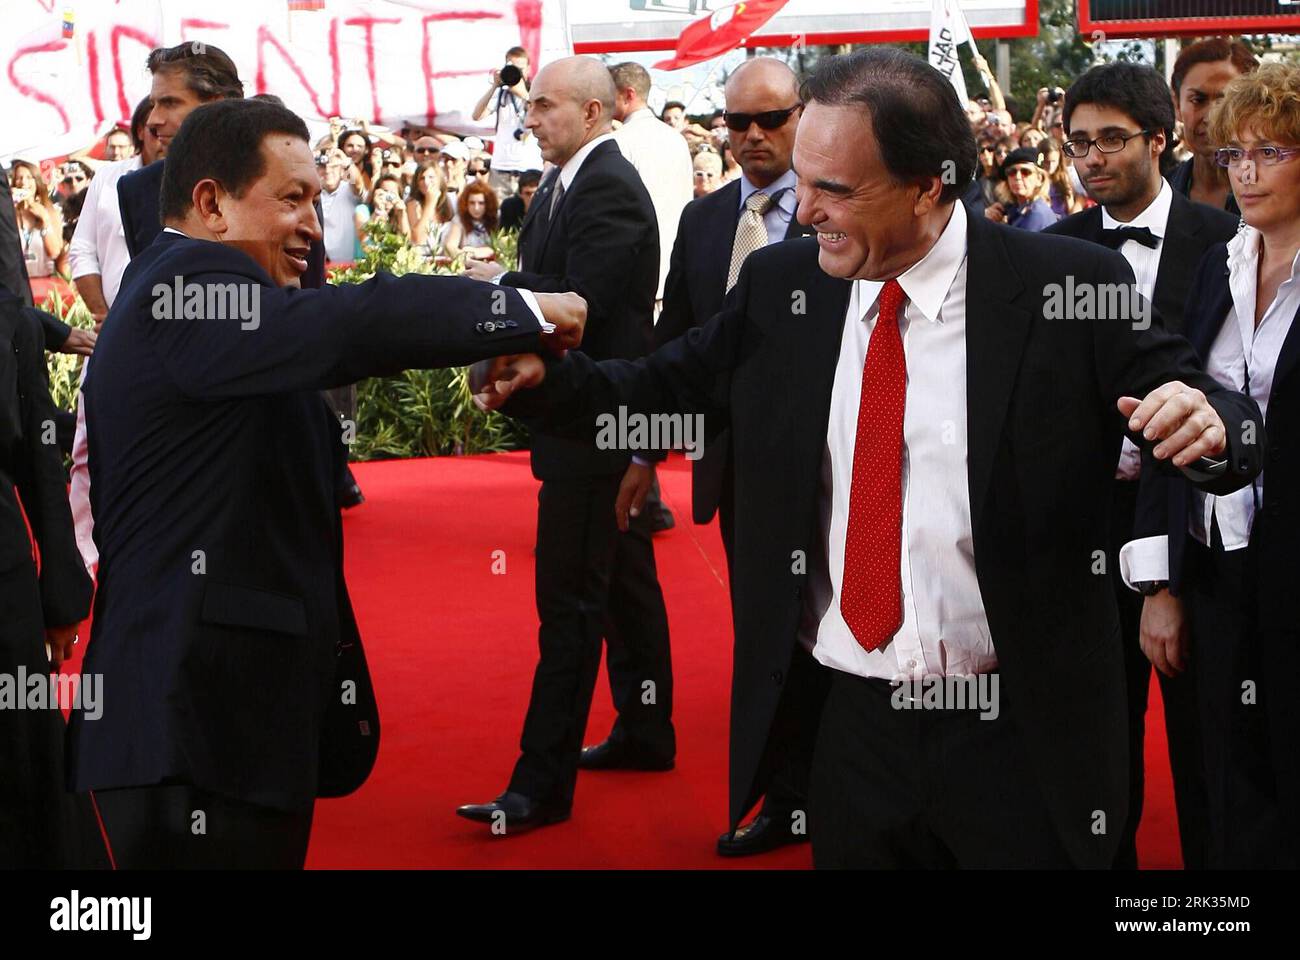 Bildnummer: 53326108  Datum: 07.09.2009  Copyright: imago/Xinhua (090908) -- VENICE, September 8, 2009 (Xinhua) -- Venezuelan President Hugo Chavez (L) interacts with U.S. director Oliver Stone (R) on the red carpet prior to the screening of Stone s film South of the Border during the 66th Venice International Film Festival on September 7, 2009. (Xinhua Photo) (nxl) (1)ITALY-VENICE-FILM-SOUTH OF BORDER-CHAVEZ PUBLICATIONxNOTxINxCHN People Politik Kbdig xdp 2009 quer    Bildnummer 53326108 Date 07 09 2009 Copyright Imago XINHUA  Venice September 8 2009 XINHUA Venezuelan President Hugo Chavez l Stock Photo